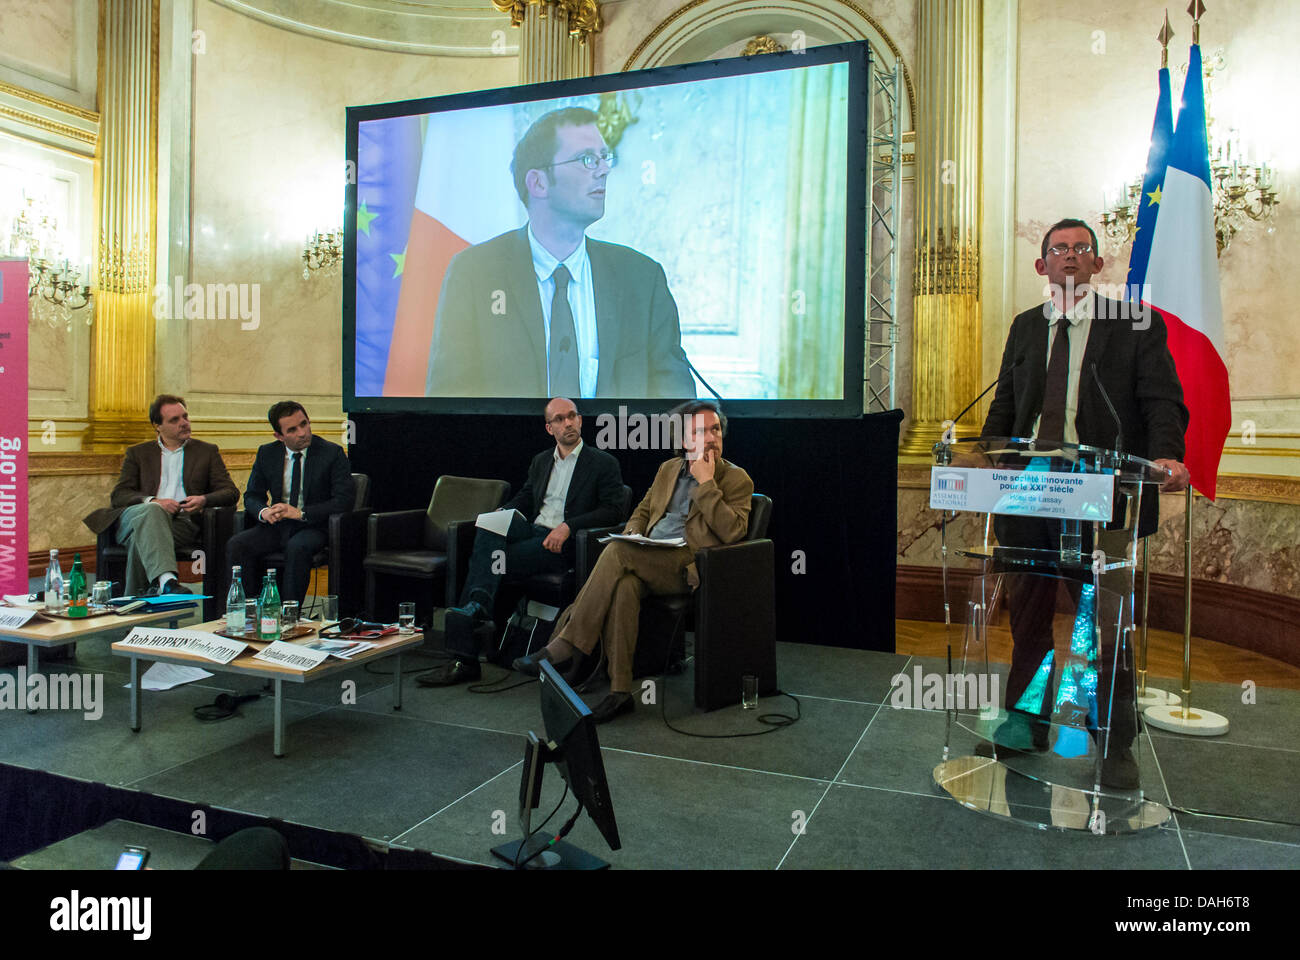 Paris, France. International Business Conference, The Innovative Society of the 21st century, 'Benoit Hamon'  (French Minister of Social Economy, Solidarity and Consummation) Giving presentation slides Speech to Audience, panel of speakers, speaker Podium Stock Photo